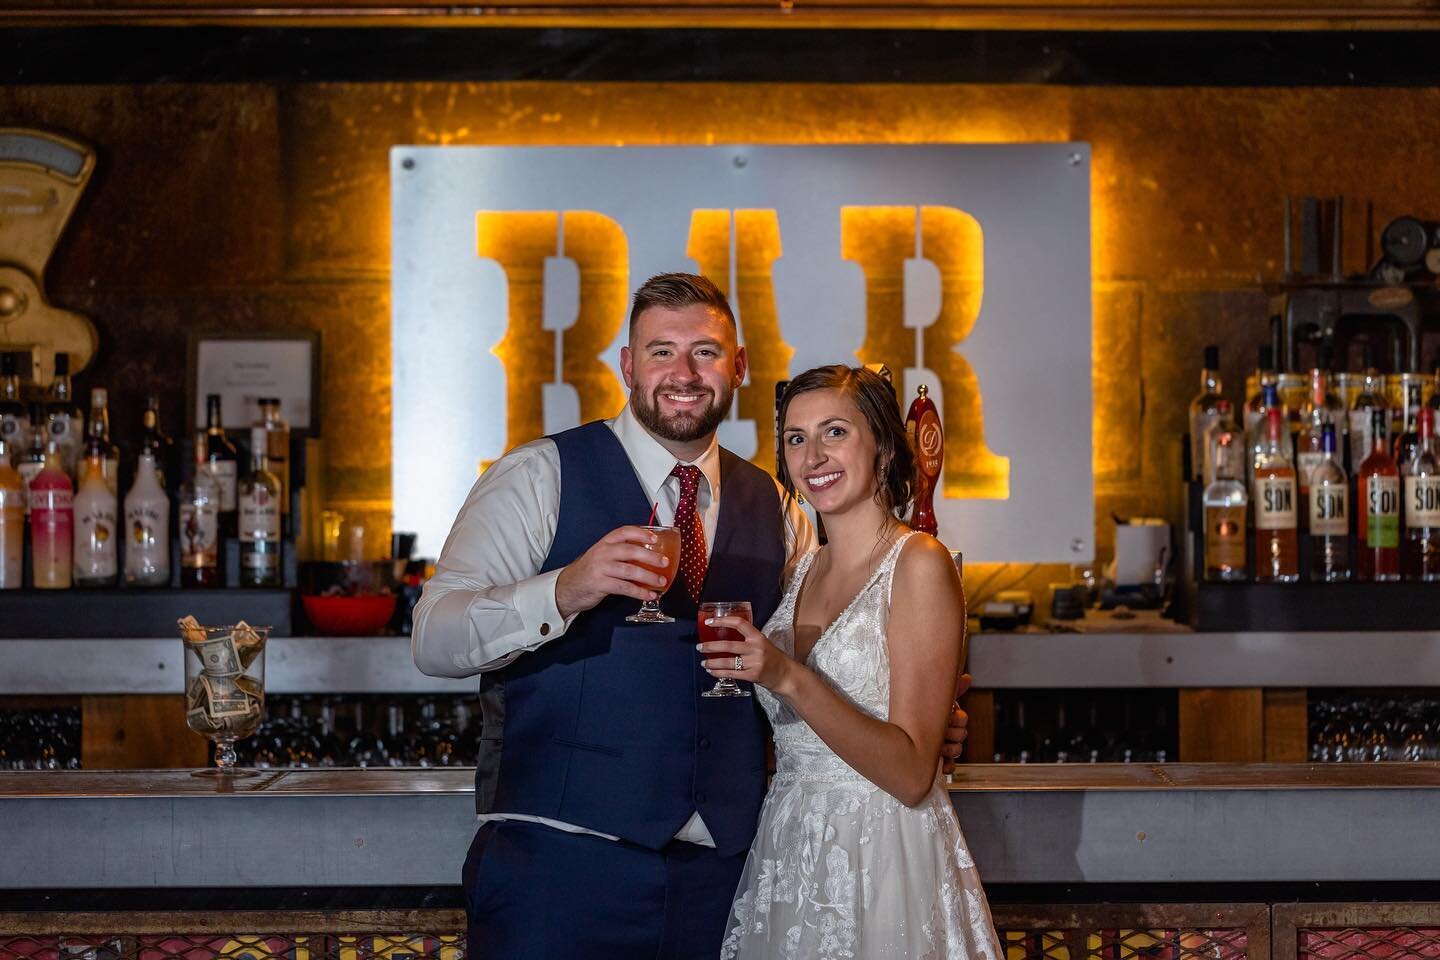 Let&rsquo;s drink to the happy couple! 🥳❤️ So glad to be a part of your special day! 

#wedding #weddings #dibblesinnorchardandestate  #thecanneryatoneward #smittenwithstrzepek #theknot #weddingwire #weddingphotography #ido #brideandgroom #dmvphotog